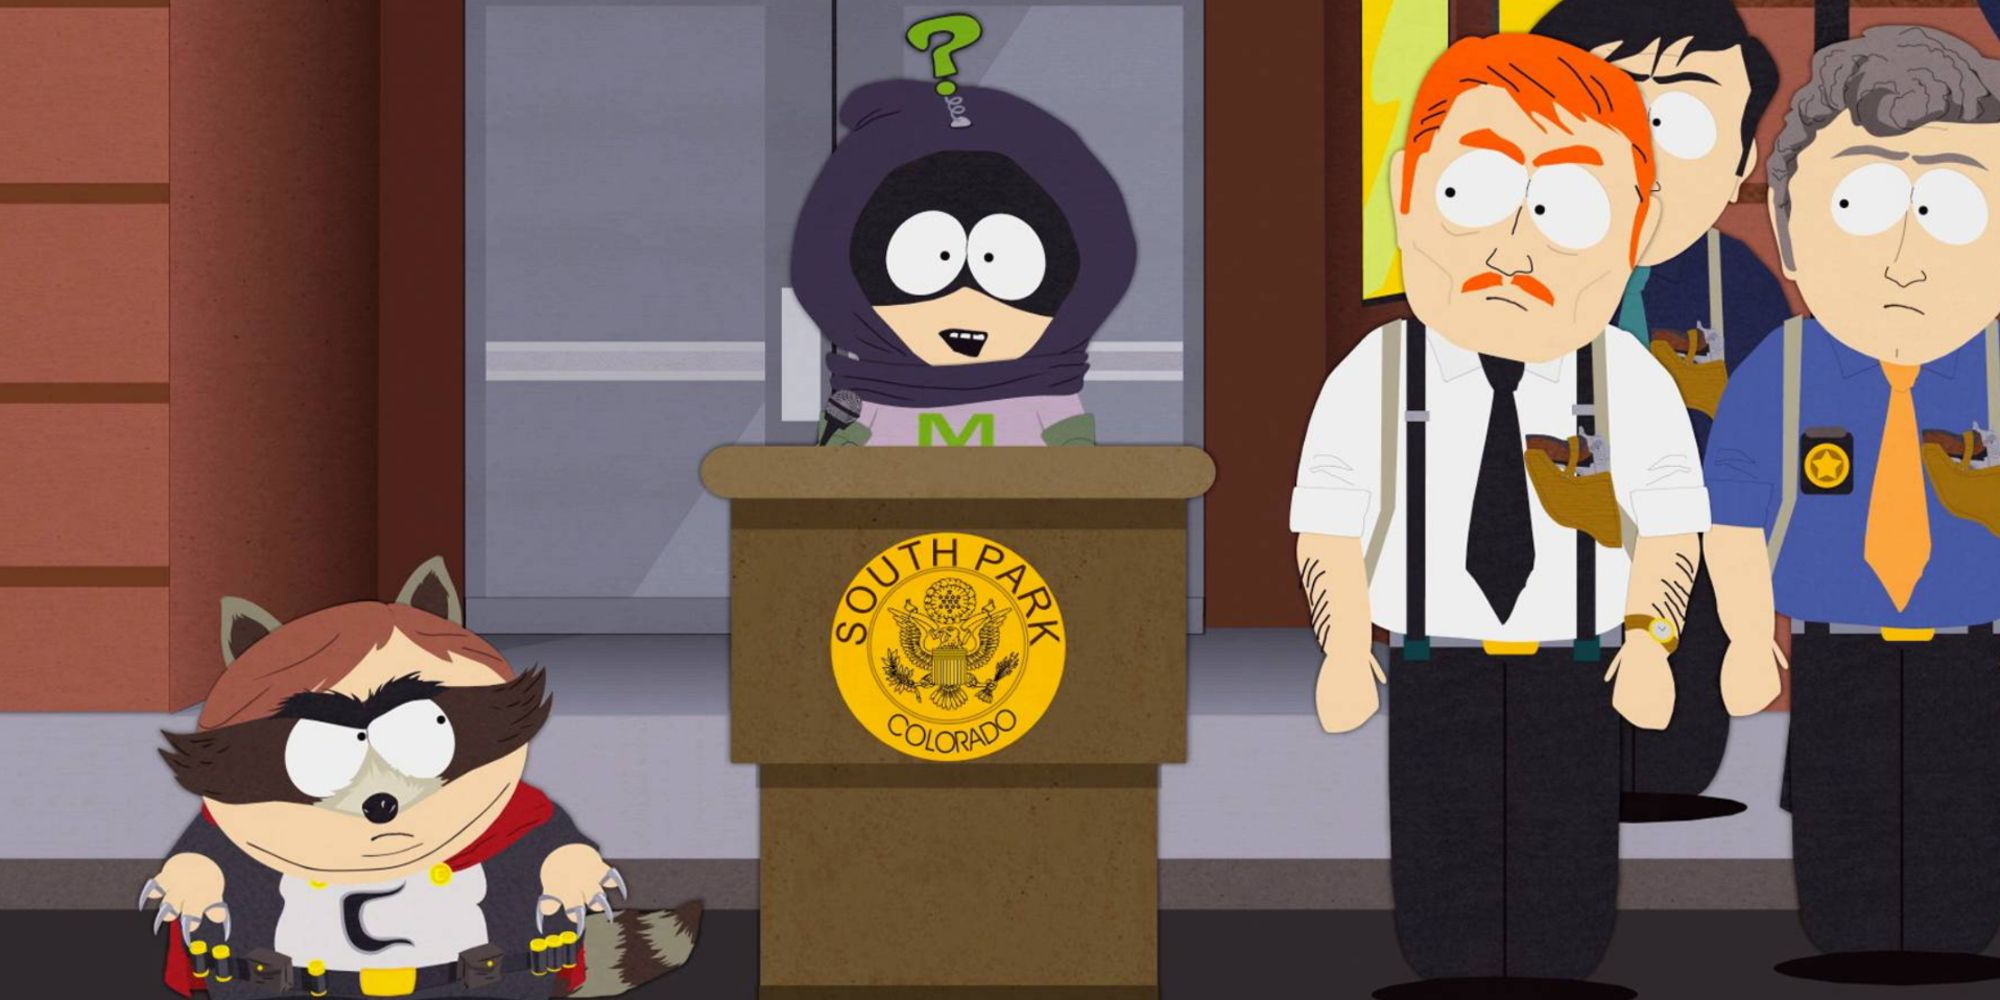 S13E02, The Coon Mysterion podium